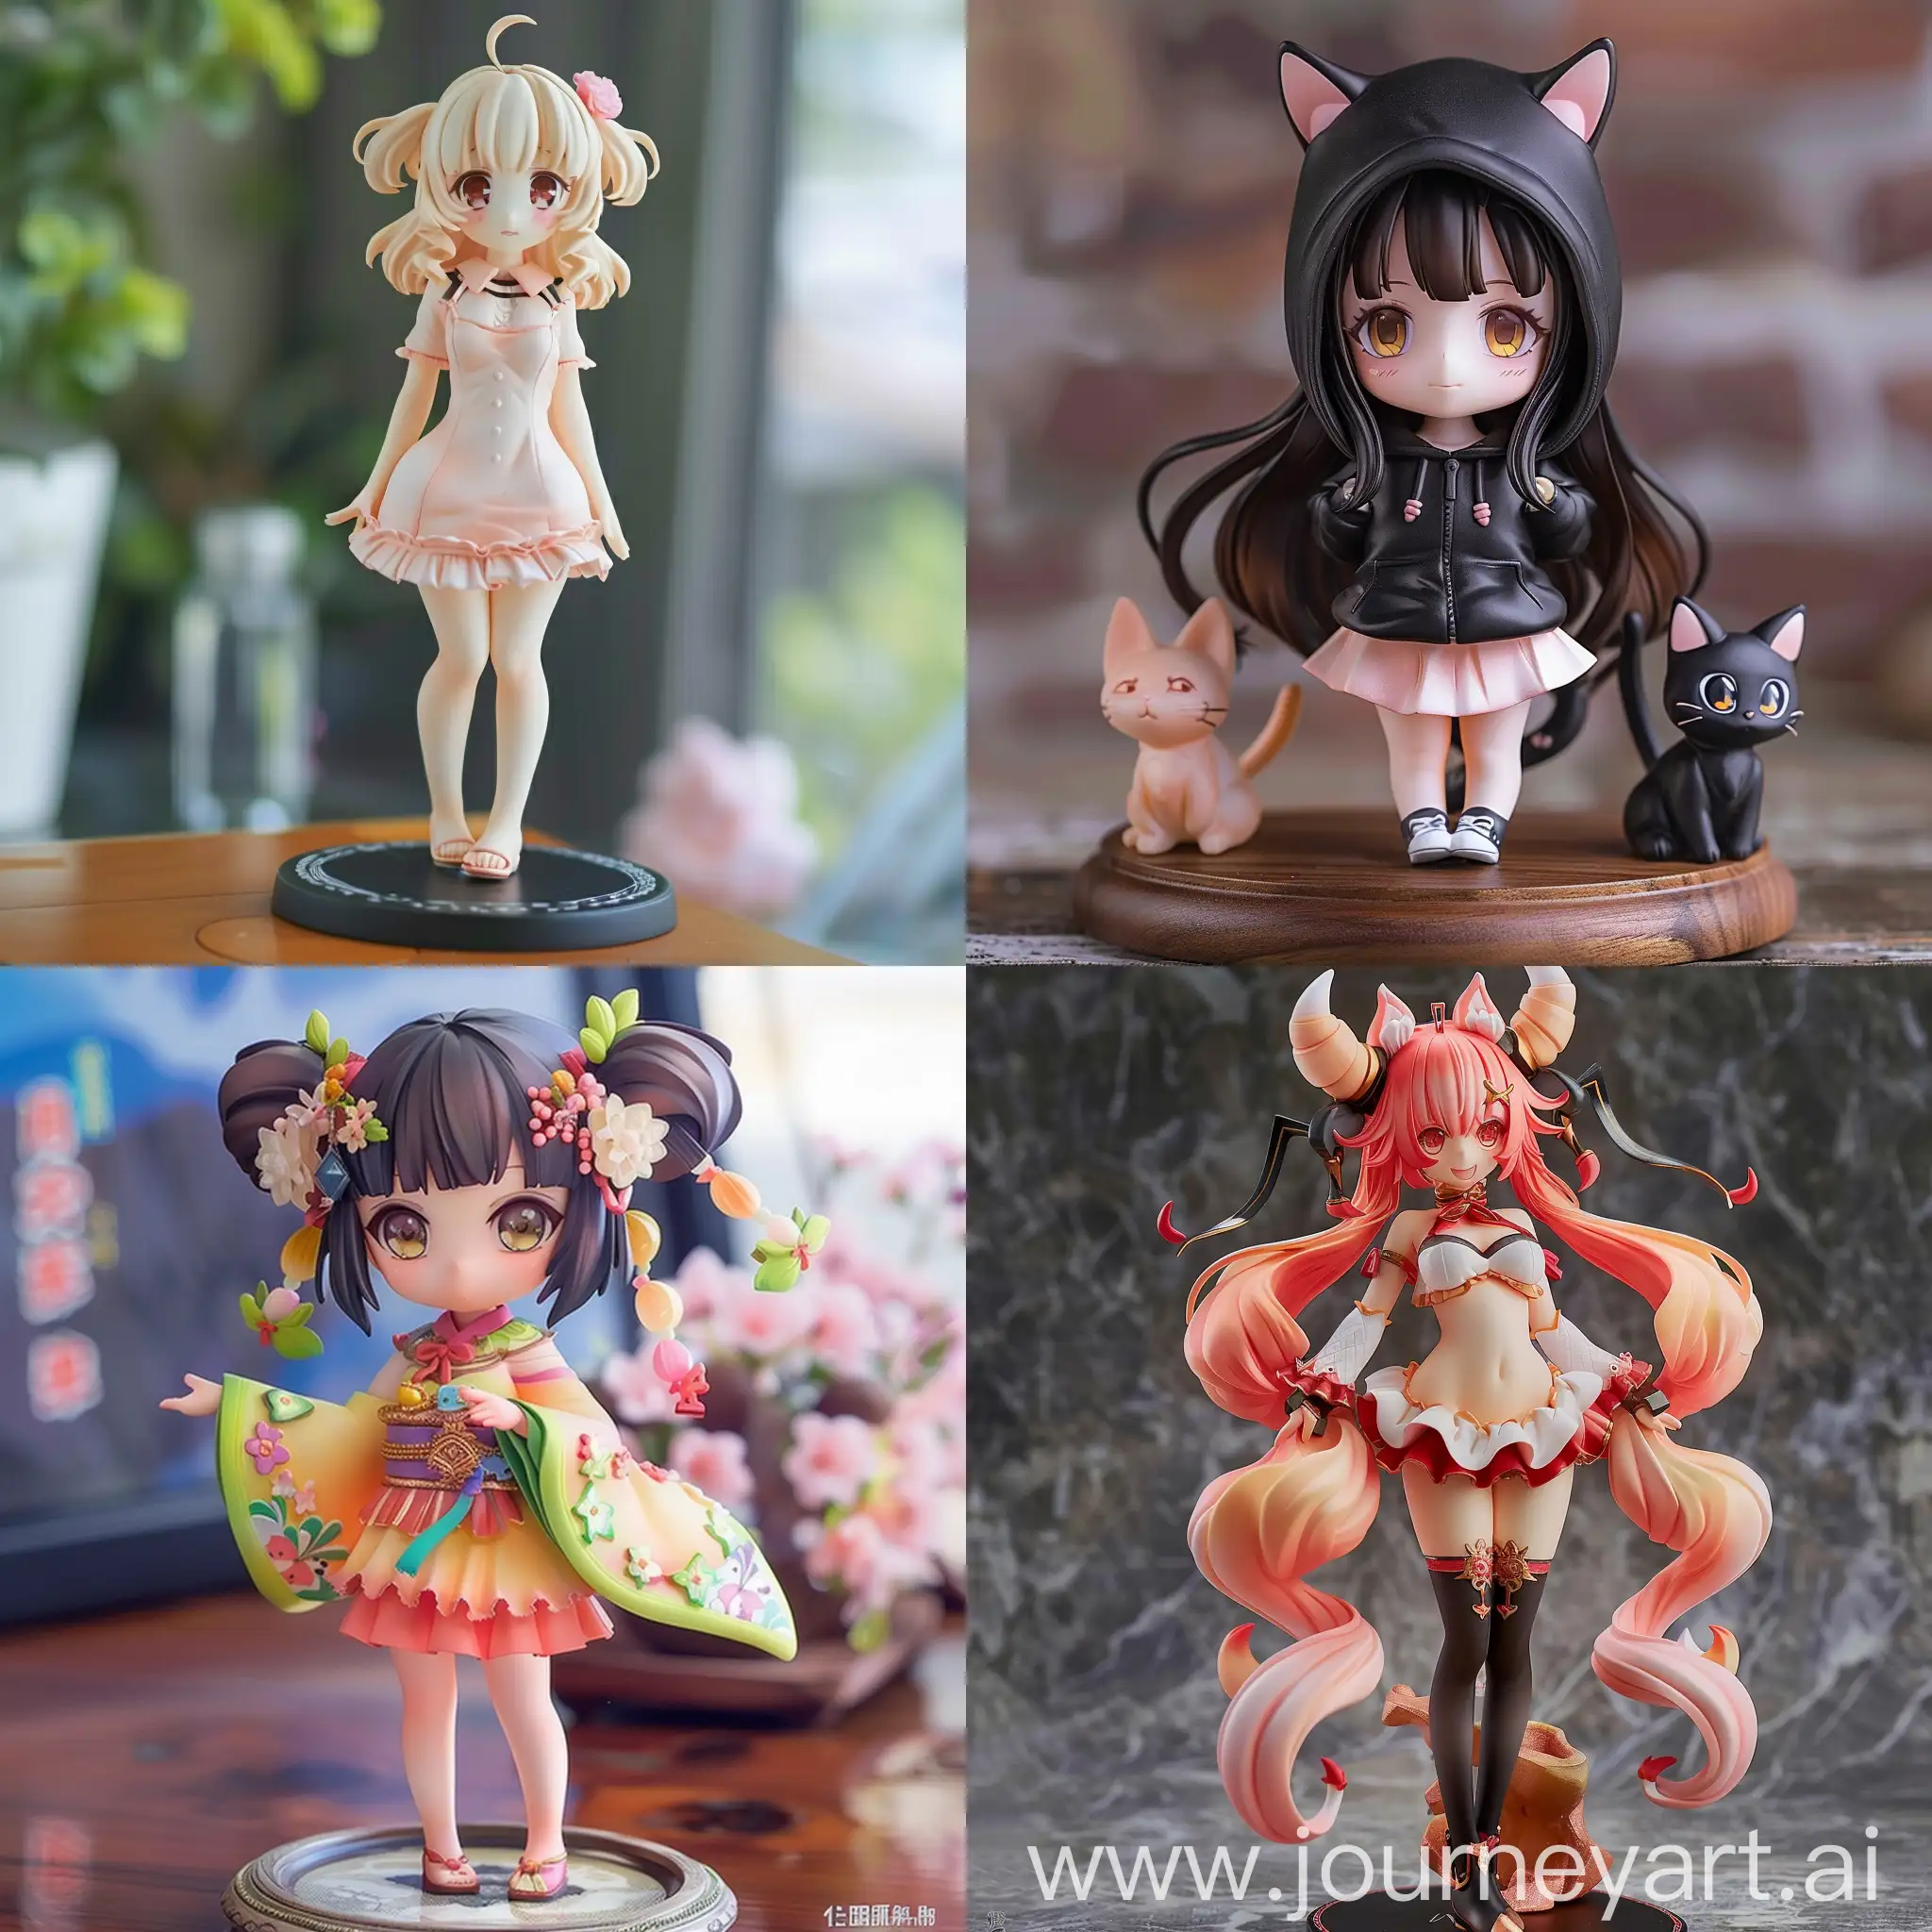 Adorable-Shengtou-Hell-Figurine-Cute-Style-and-Posture-in-11-Aspect-Ratio